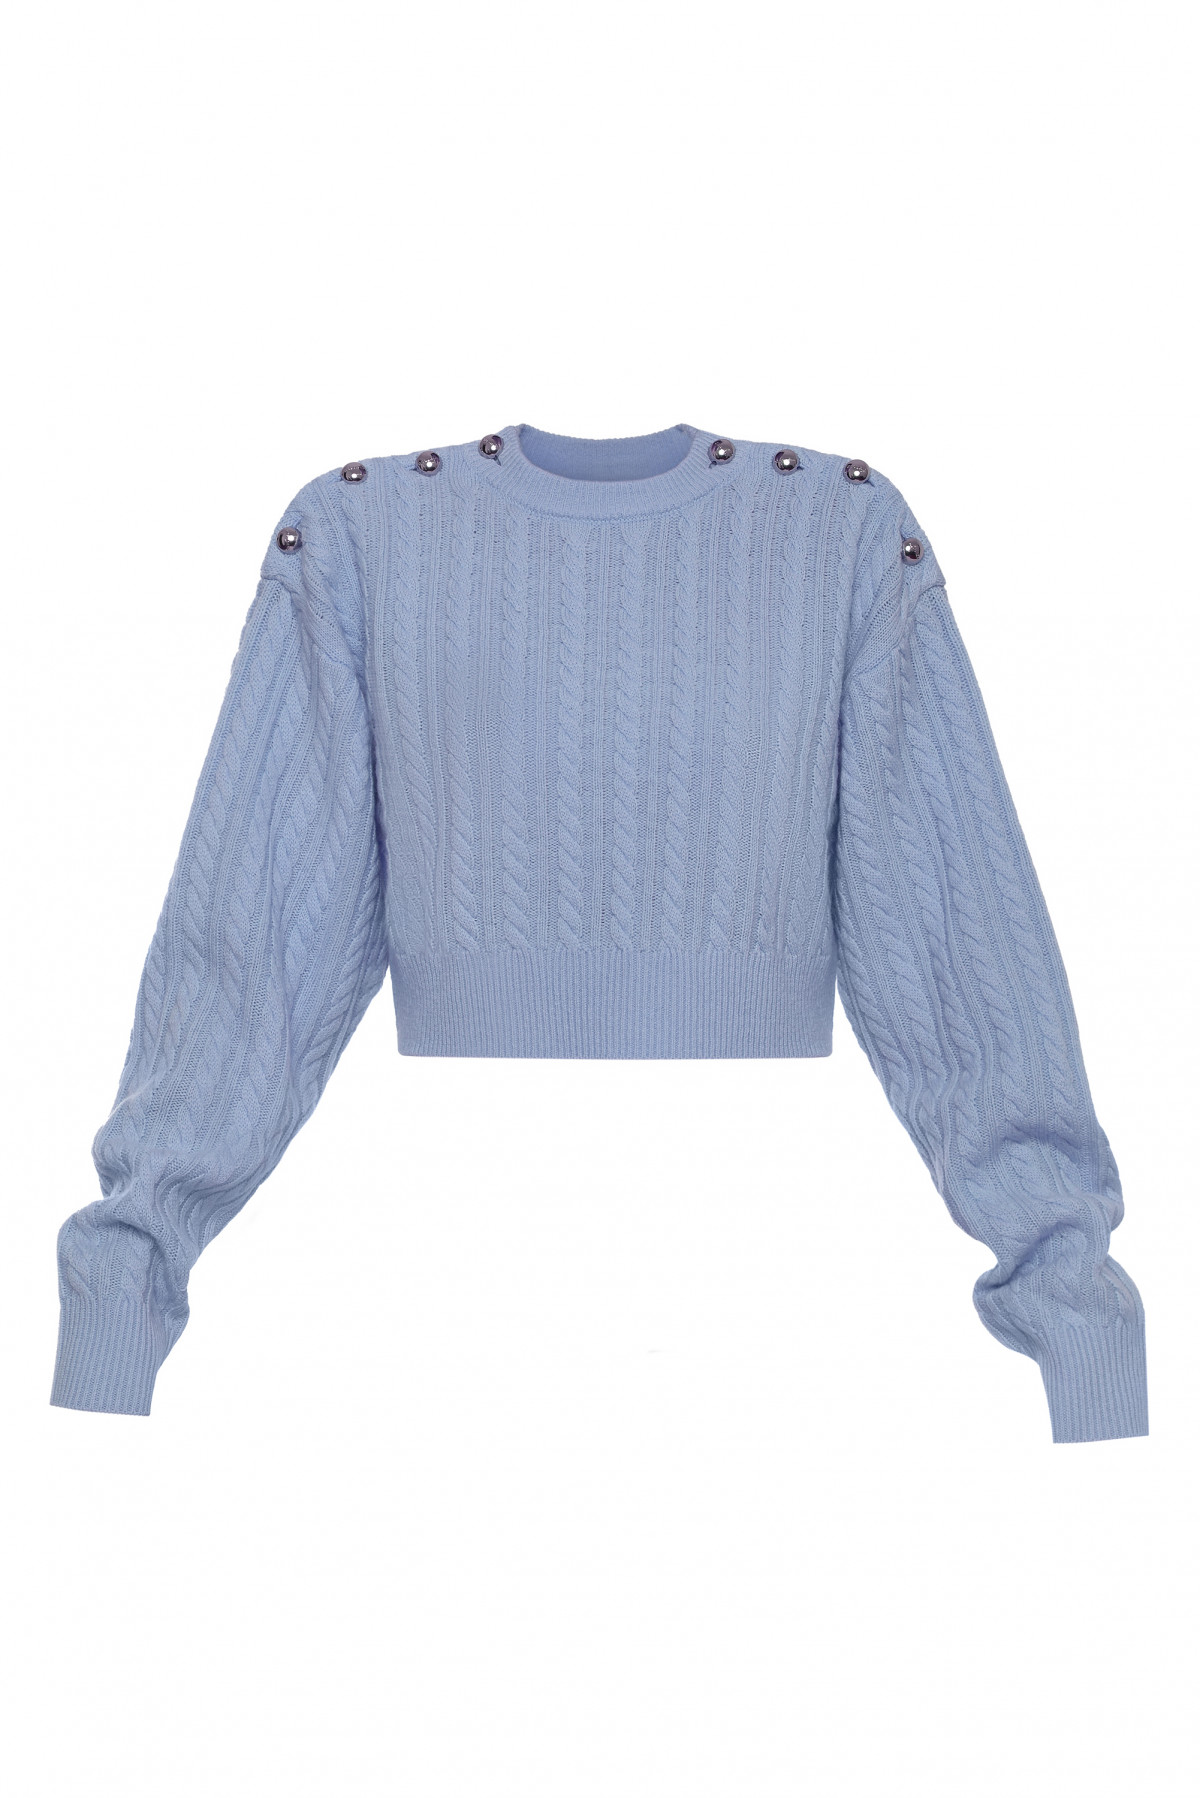 GEORGE KEBURIA - CABLE-KNIT WOOL-CASHMERE SWEATER